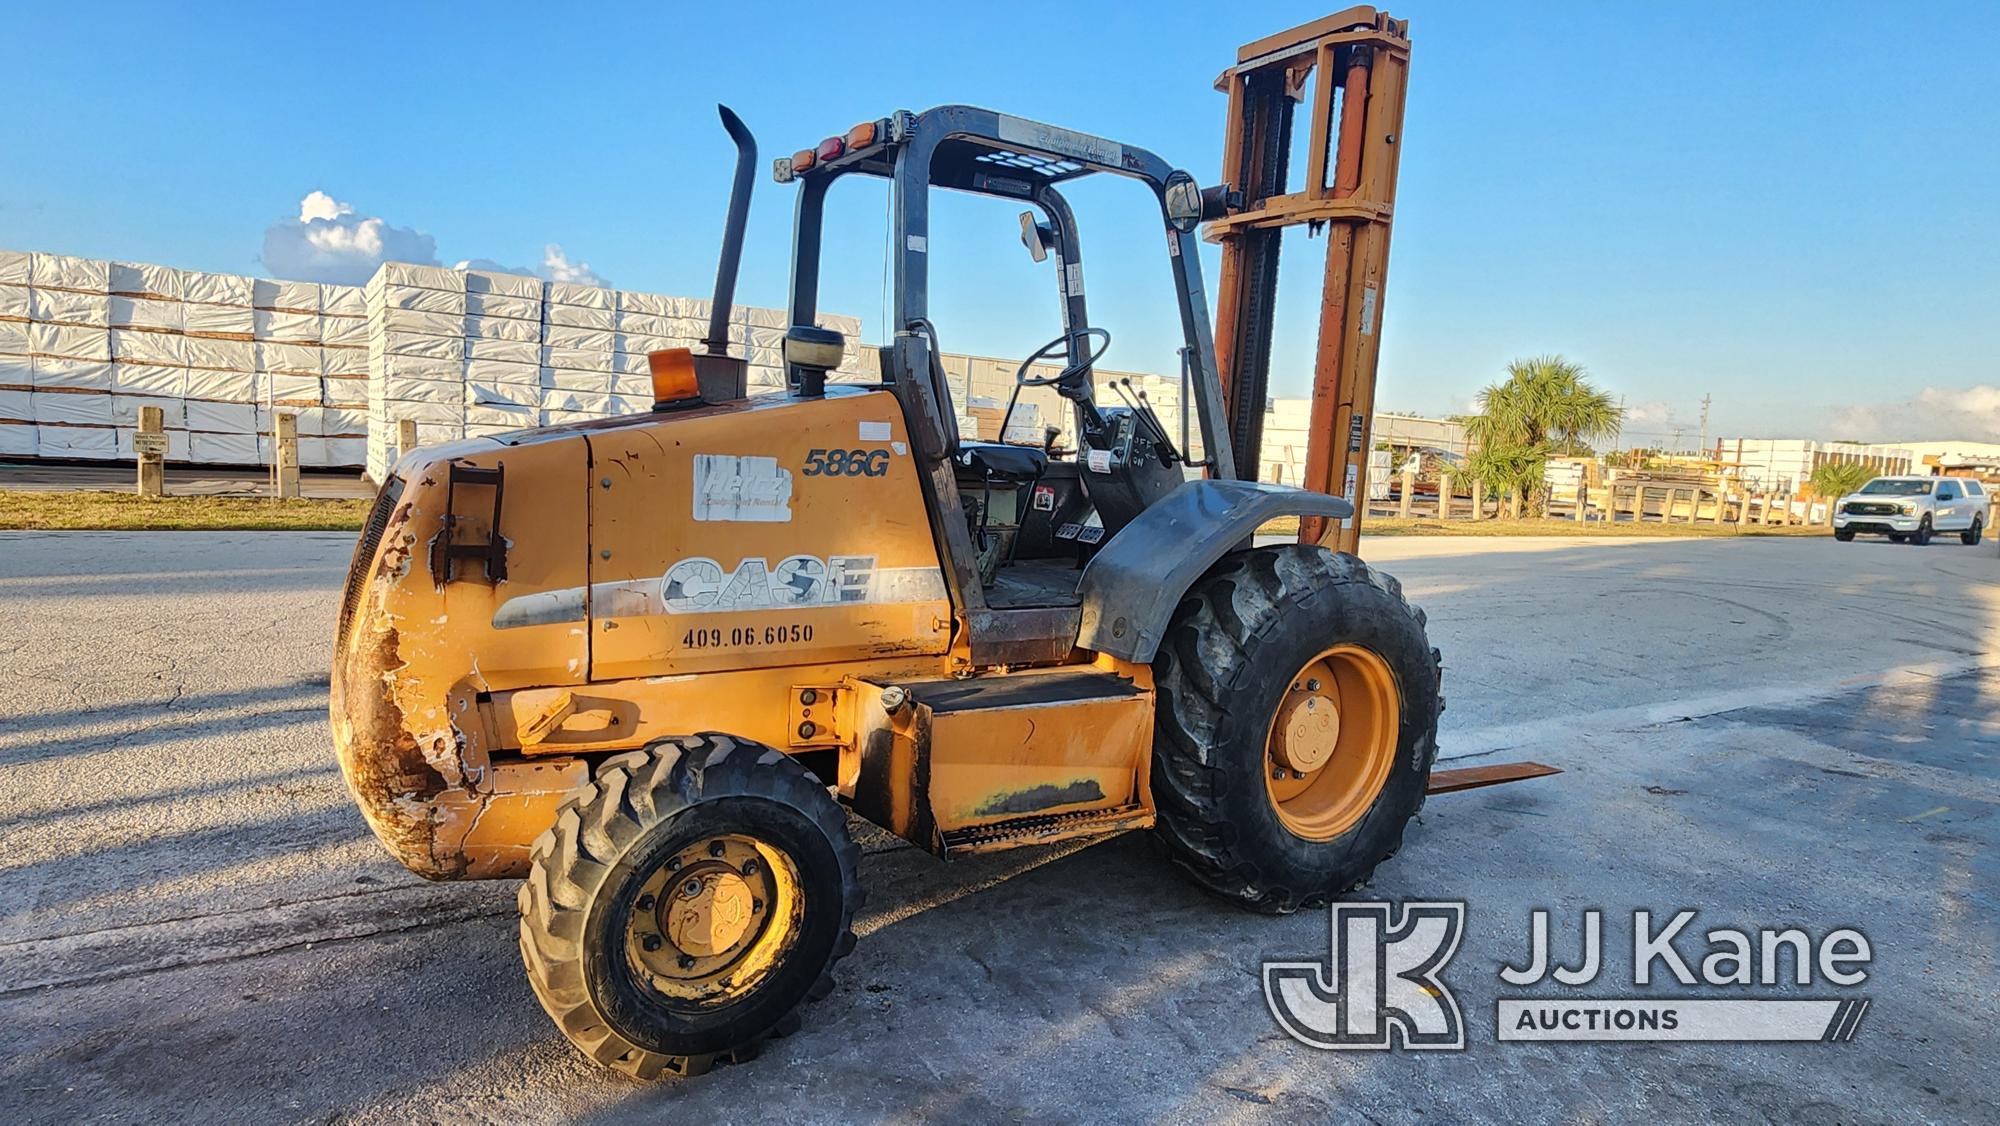 (Riviera Beach, FL) Case 586G 4x4 Rough Terrain Forklift, Loading Assistance Available Runs, Moves,